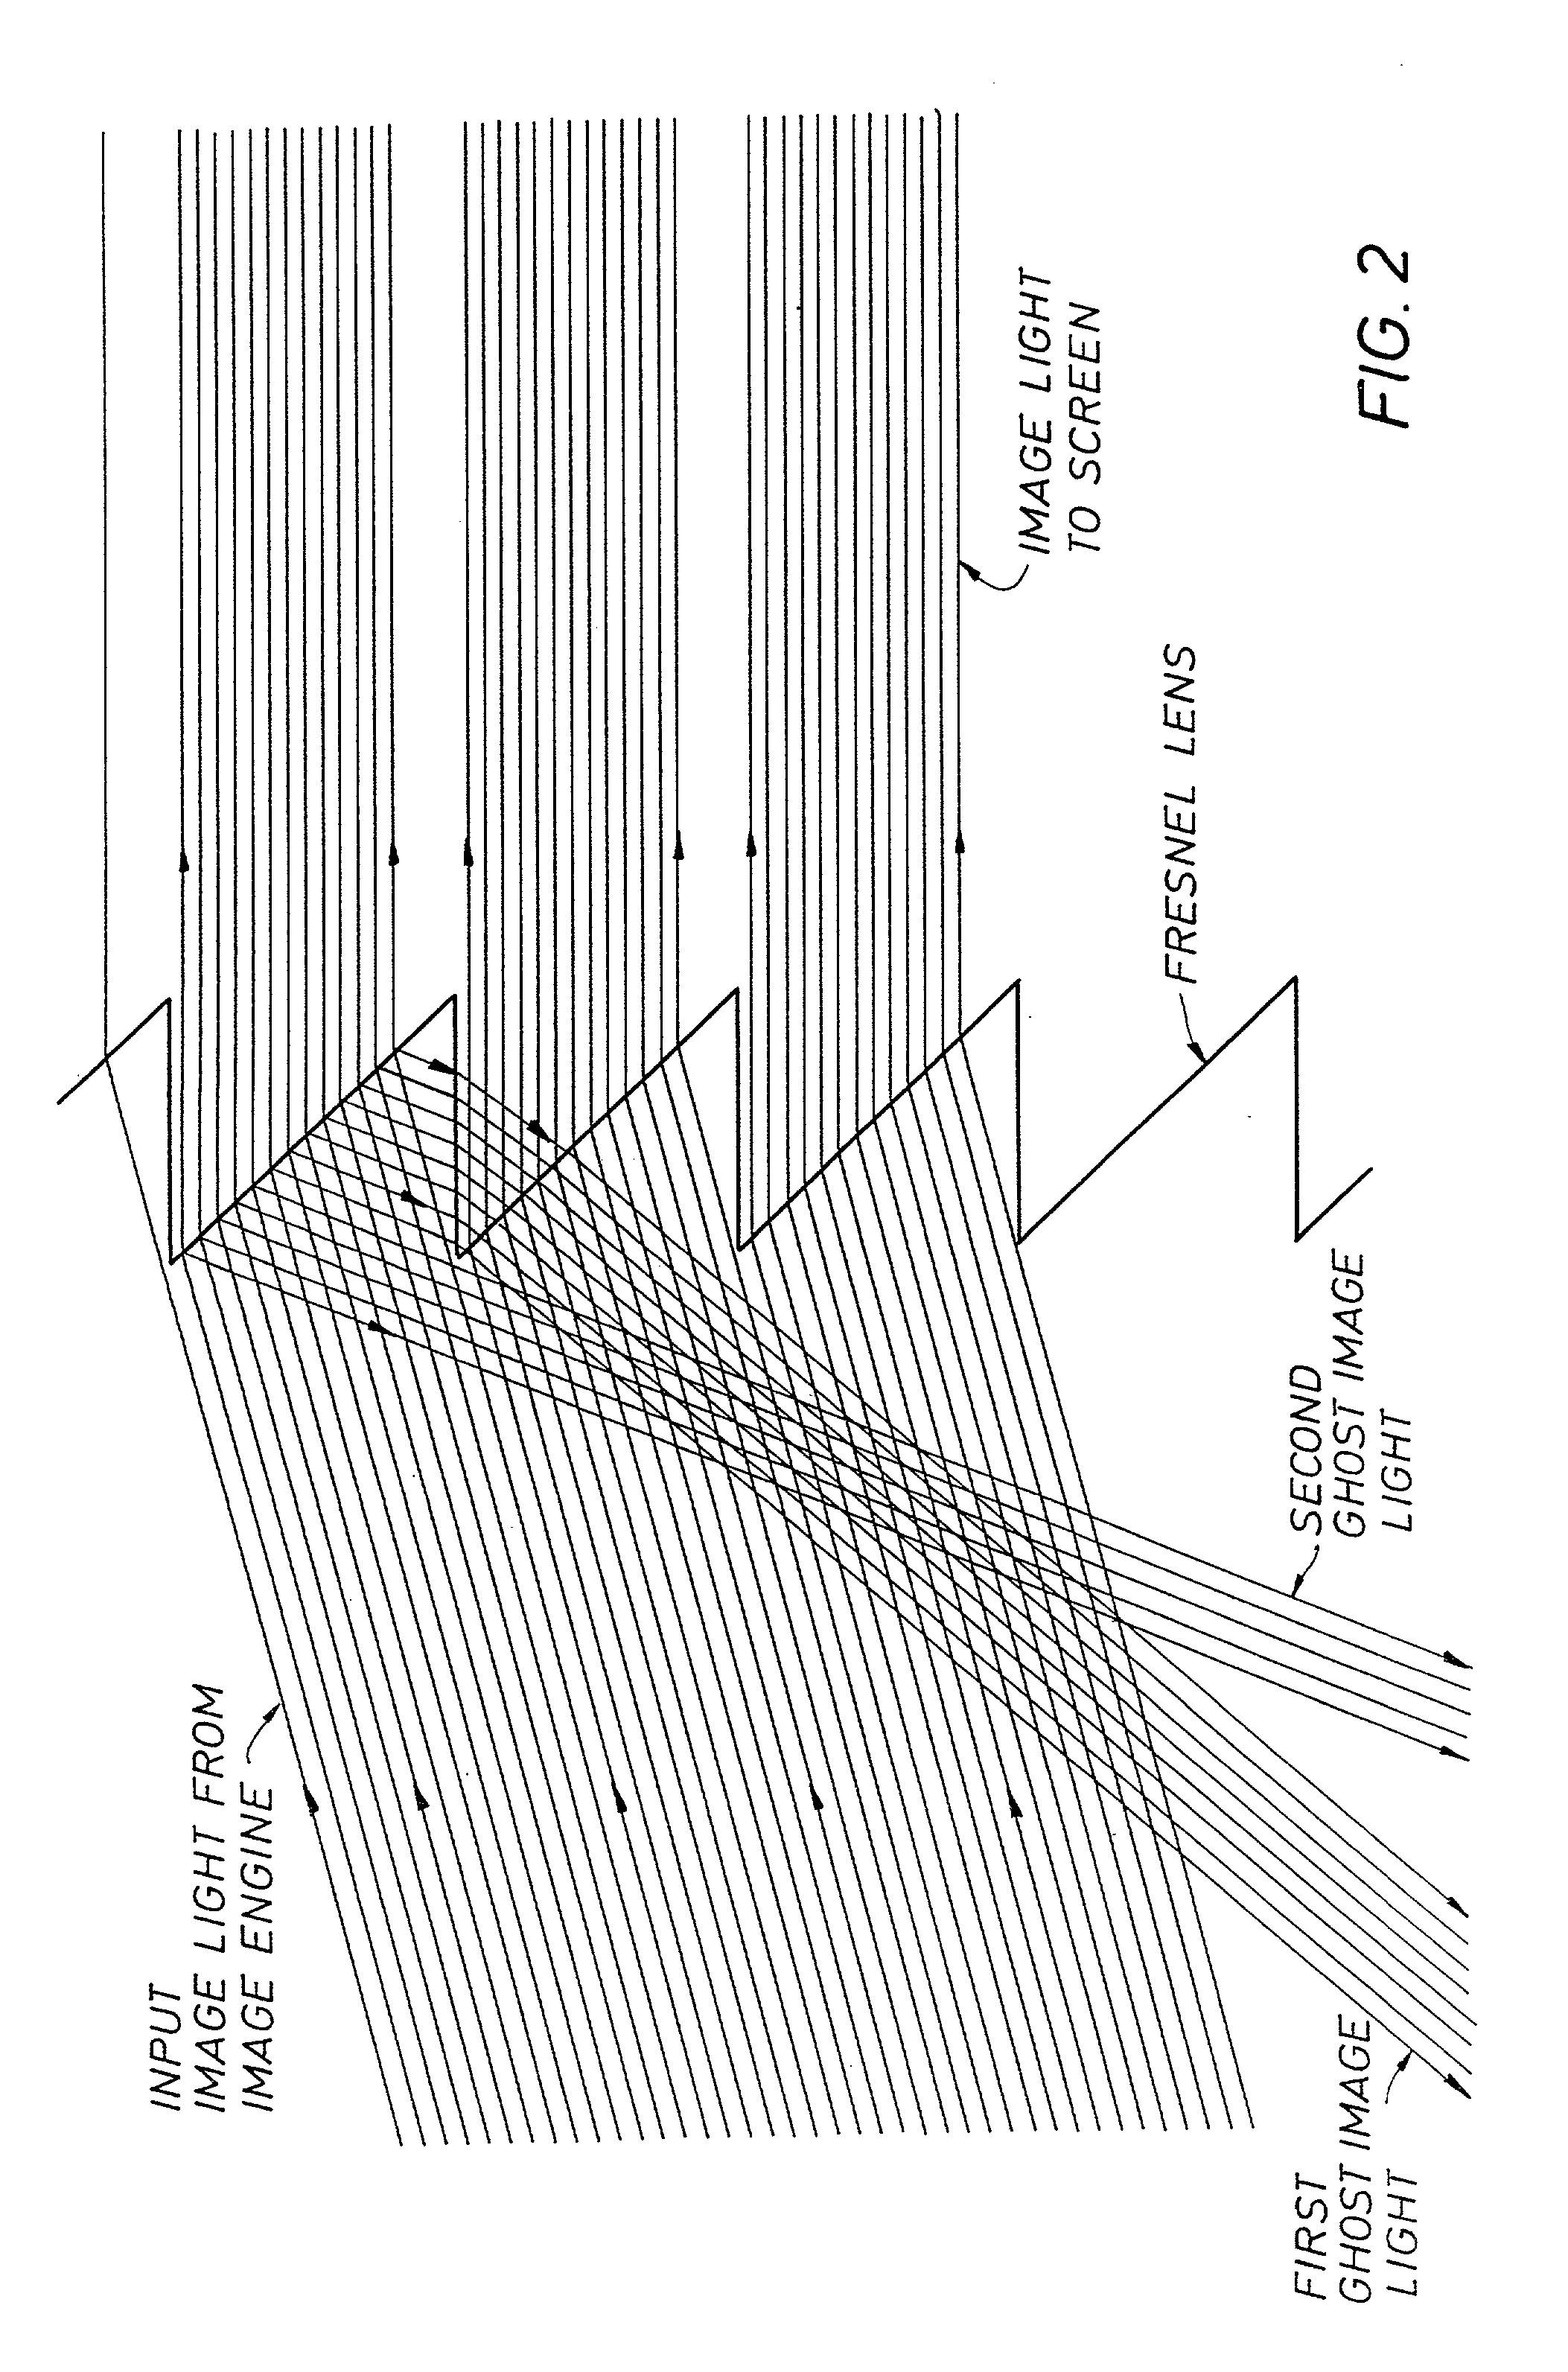 Projection screen apparatus including holographic optical element